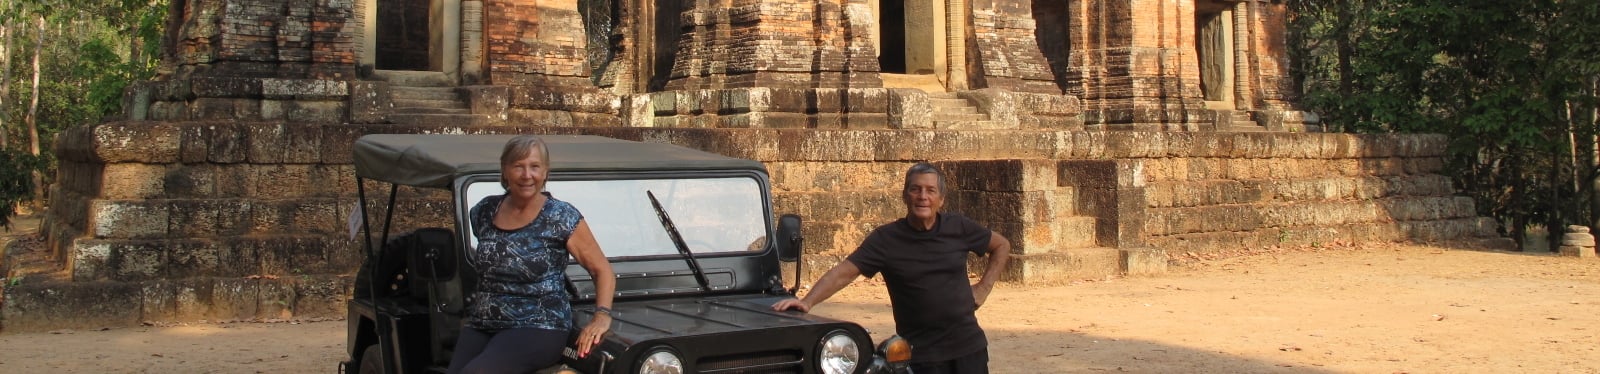 Image of Angkor ‘Tomb Raider’ with an Archaeologist